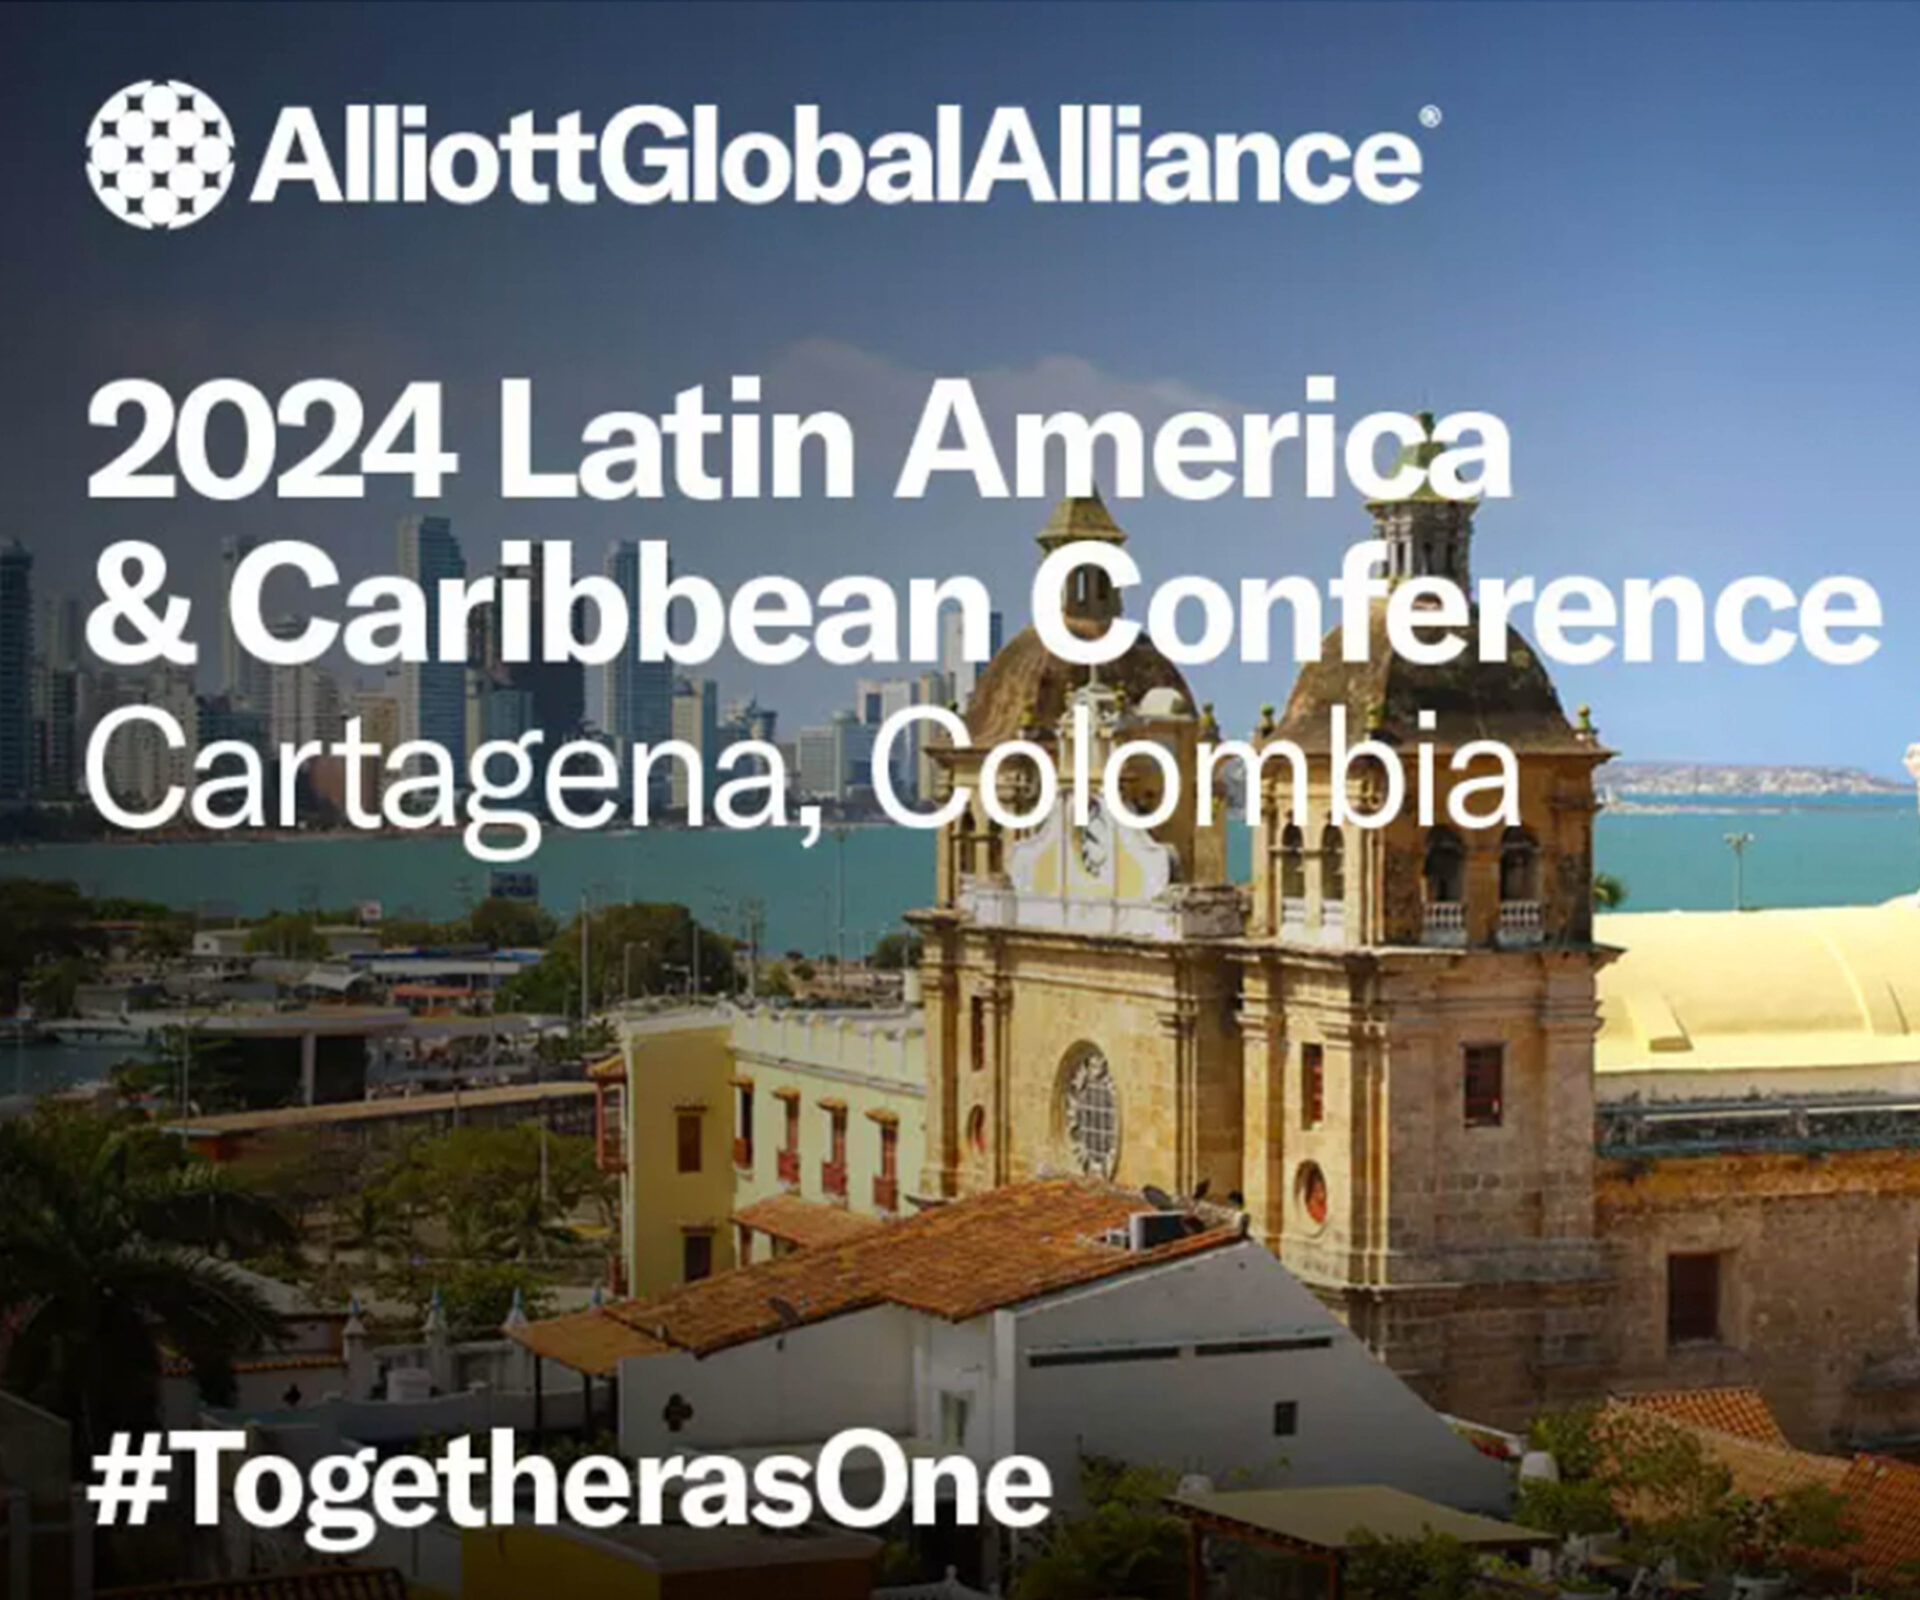 Our Law Firm at the AGA Latin America & Caribbean Regional Meeting